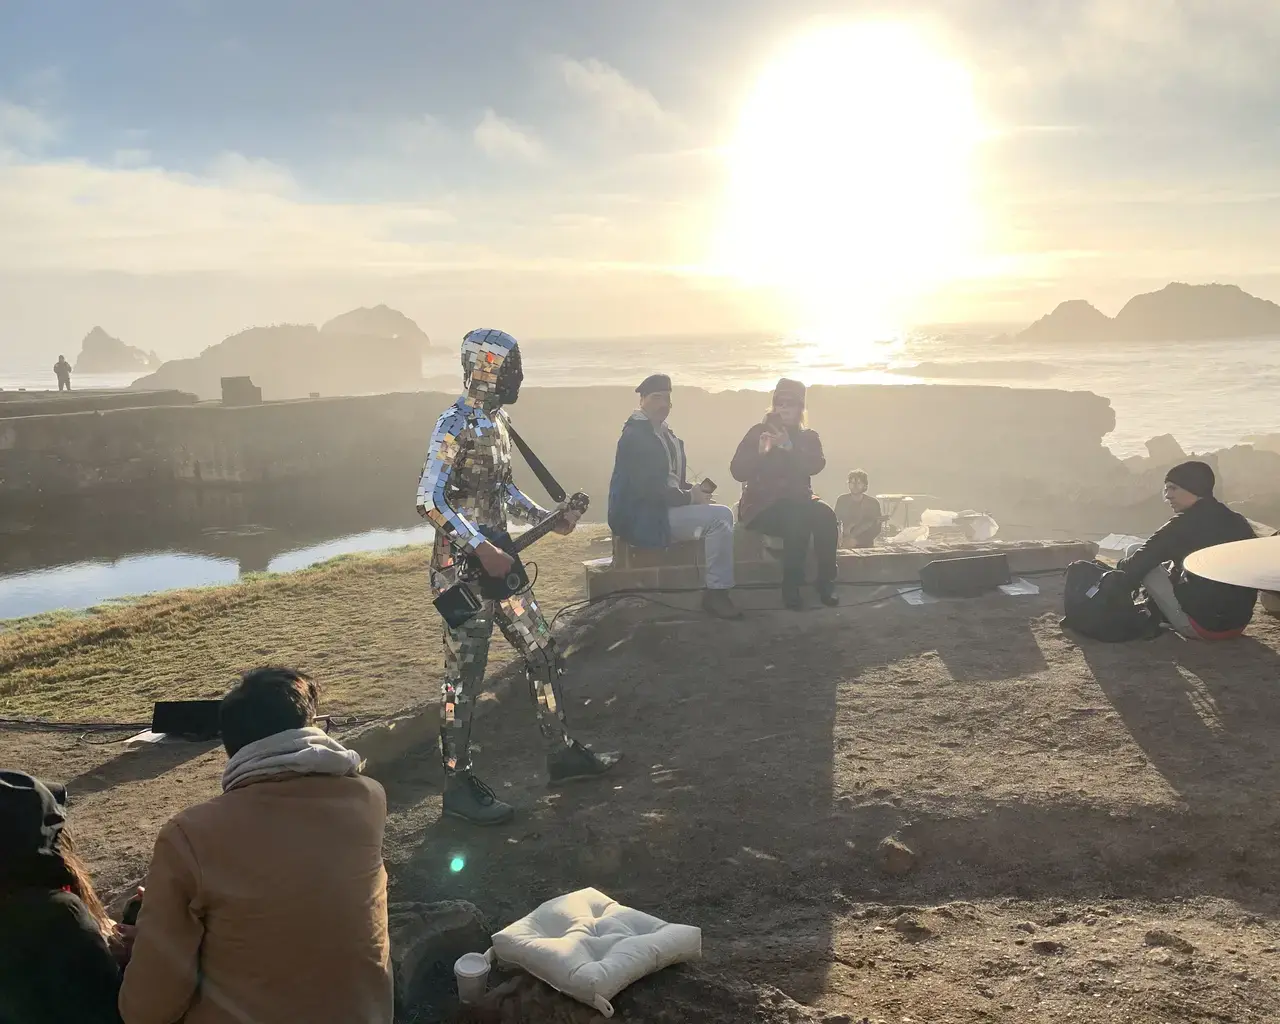 Tremble Staves,&nbsp;composed by Pew Fellow Raven Chacon, 2017-2019, performed amongst the collapsed ruins of the failed Sutro Baths in San Francisco’s Lands End. Photo courtesy of the artist.